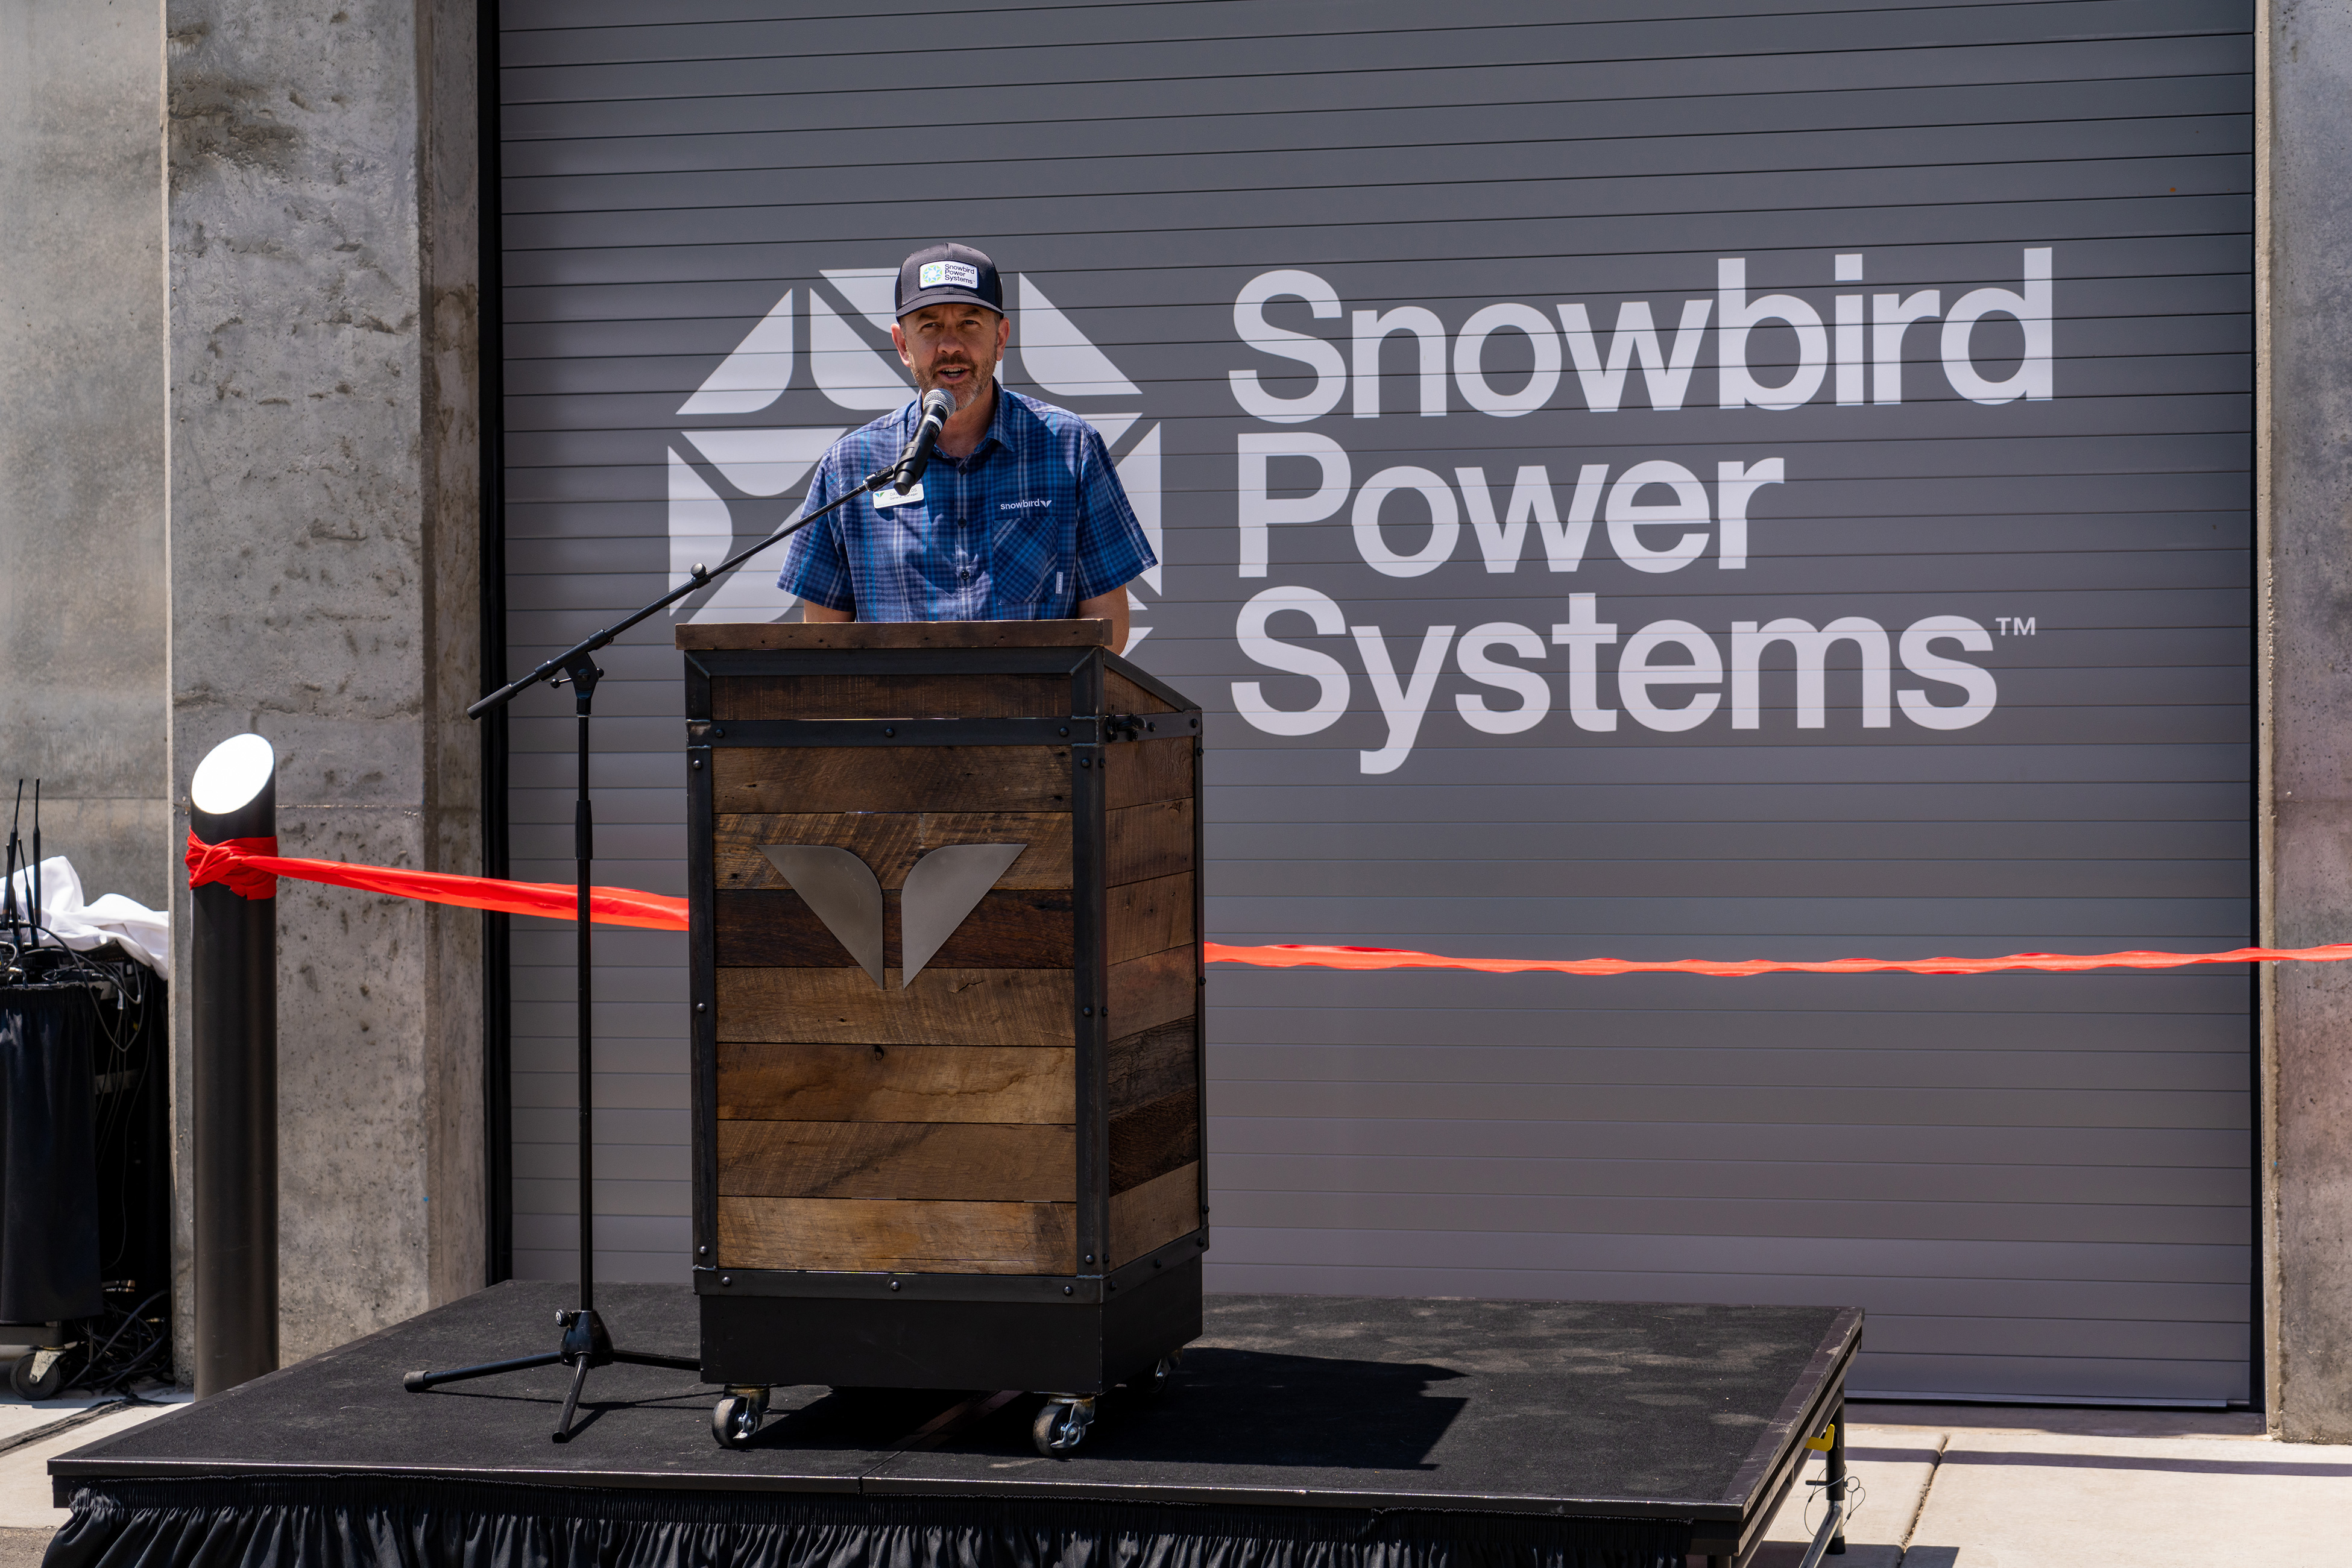 Snowbird President and GM Dave Fields at Snowbird Power Systems Opening